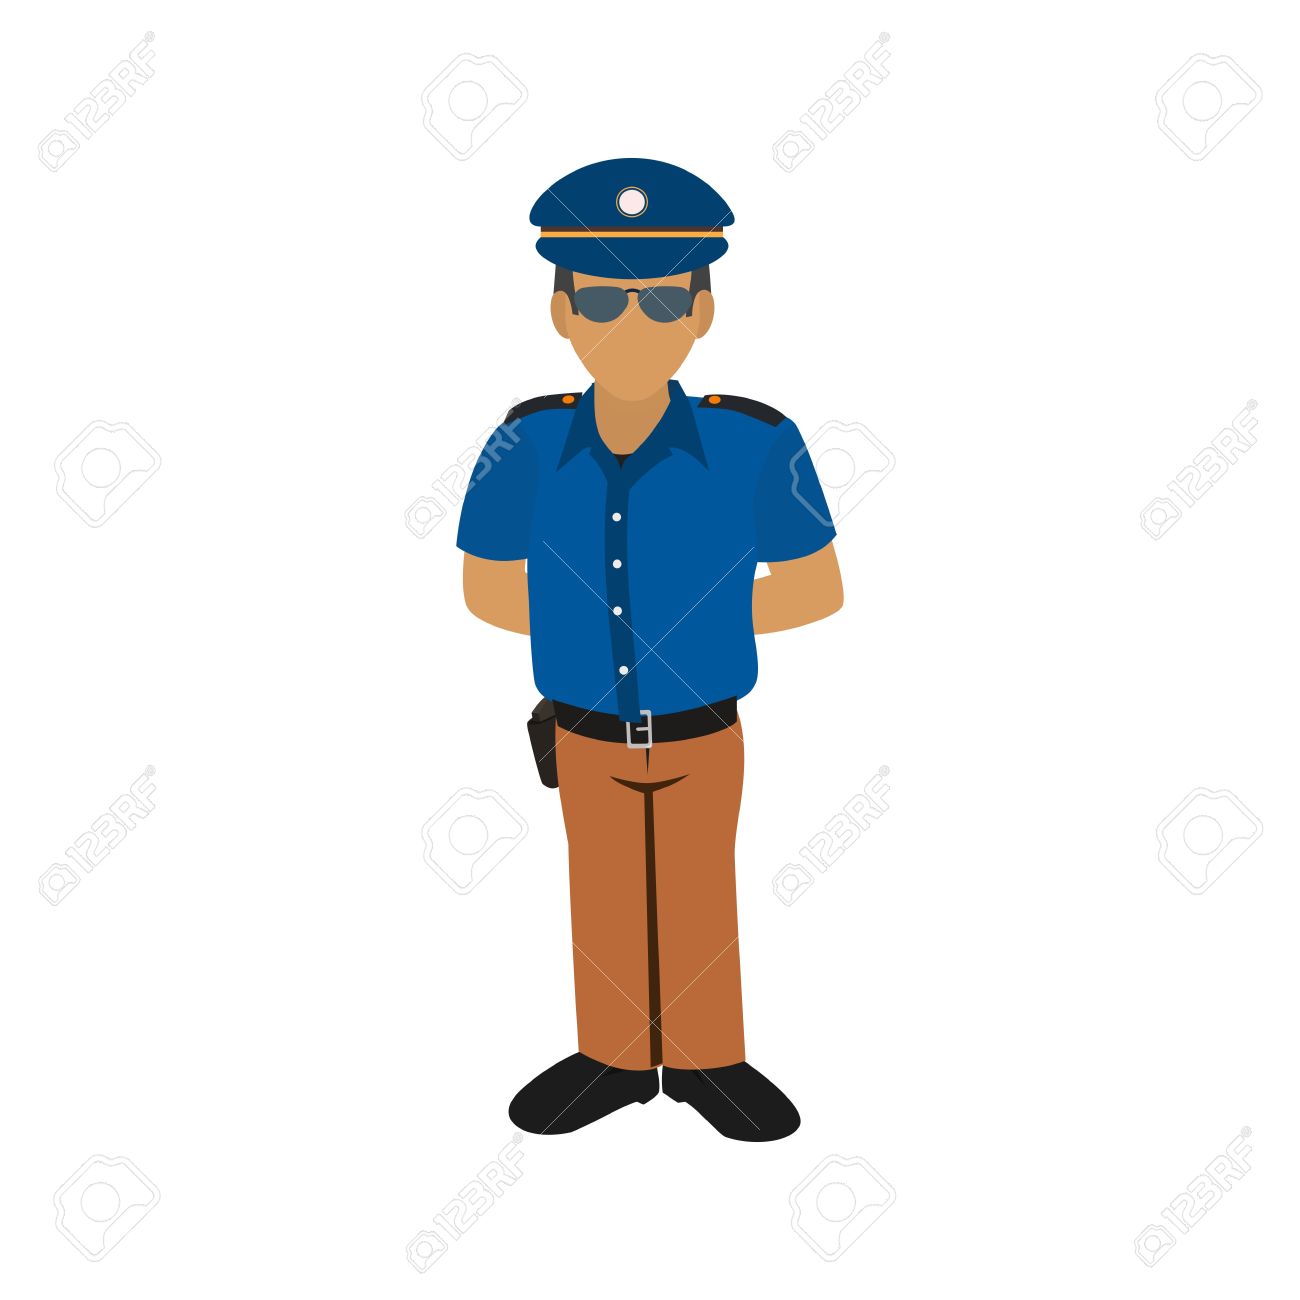 Airport clipart security guard. Drawing at getdrawings com